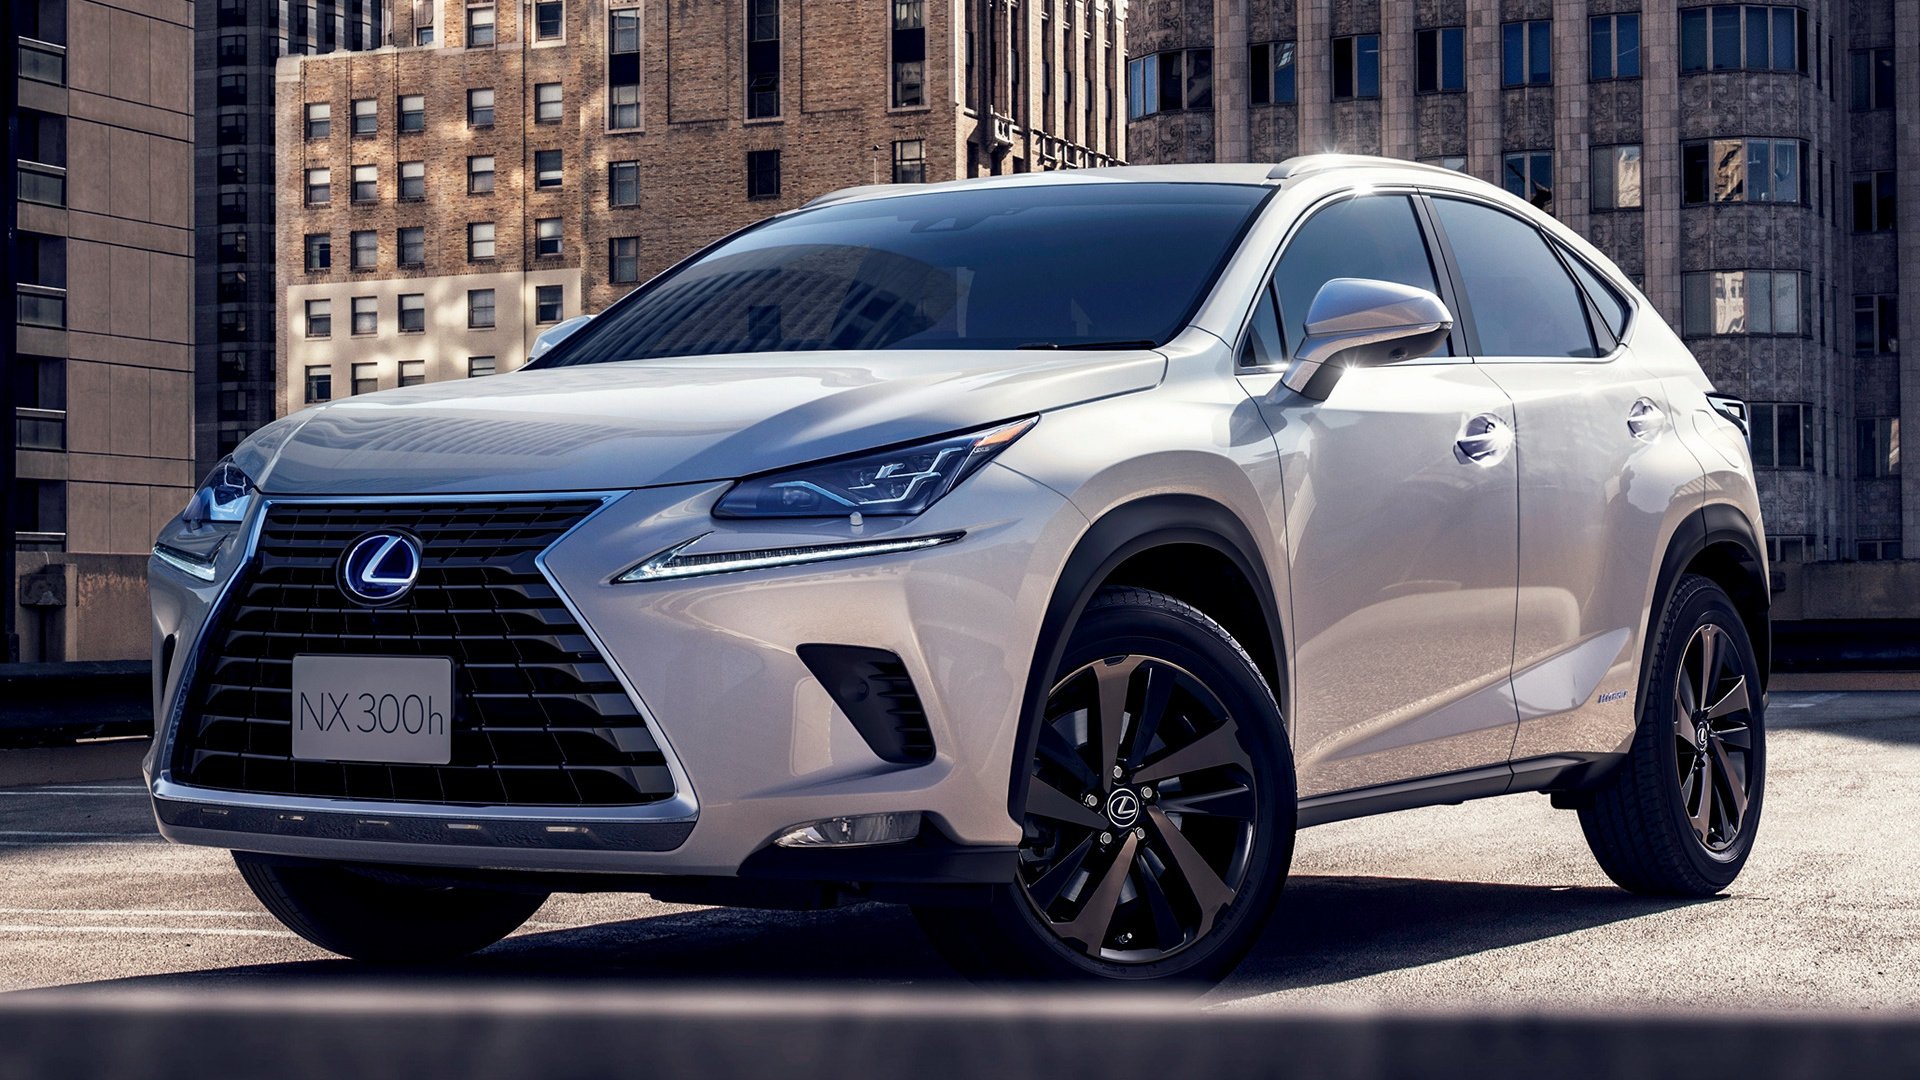 18 Lexus Nx 300h Hd Wallpapers Background Images Wallpaper Abyss